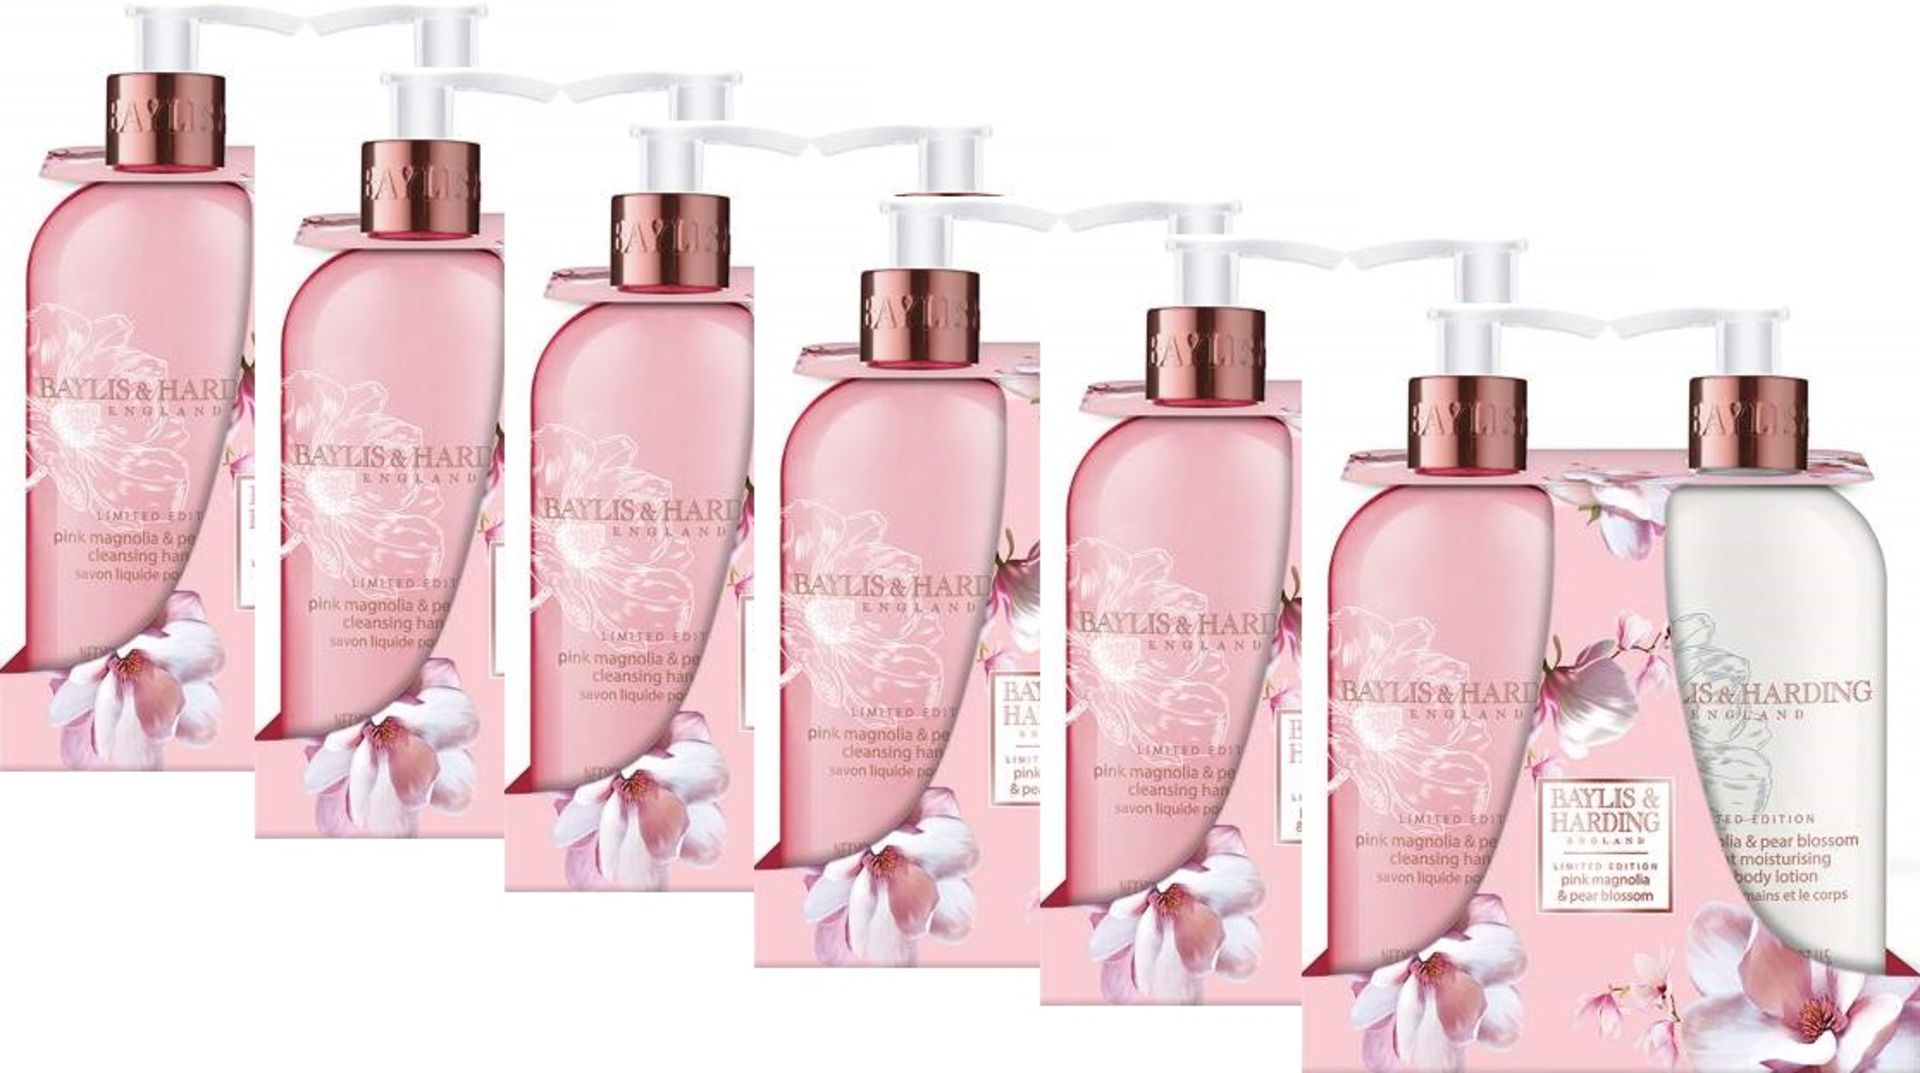 V Brand New Six Gift Sets - Baylis & Harding Limited Edition Pink Magnolia And Pear Blossom Twin